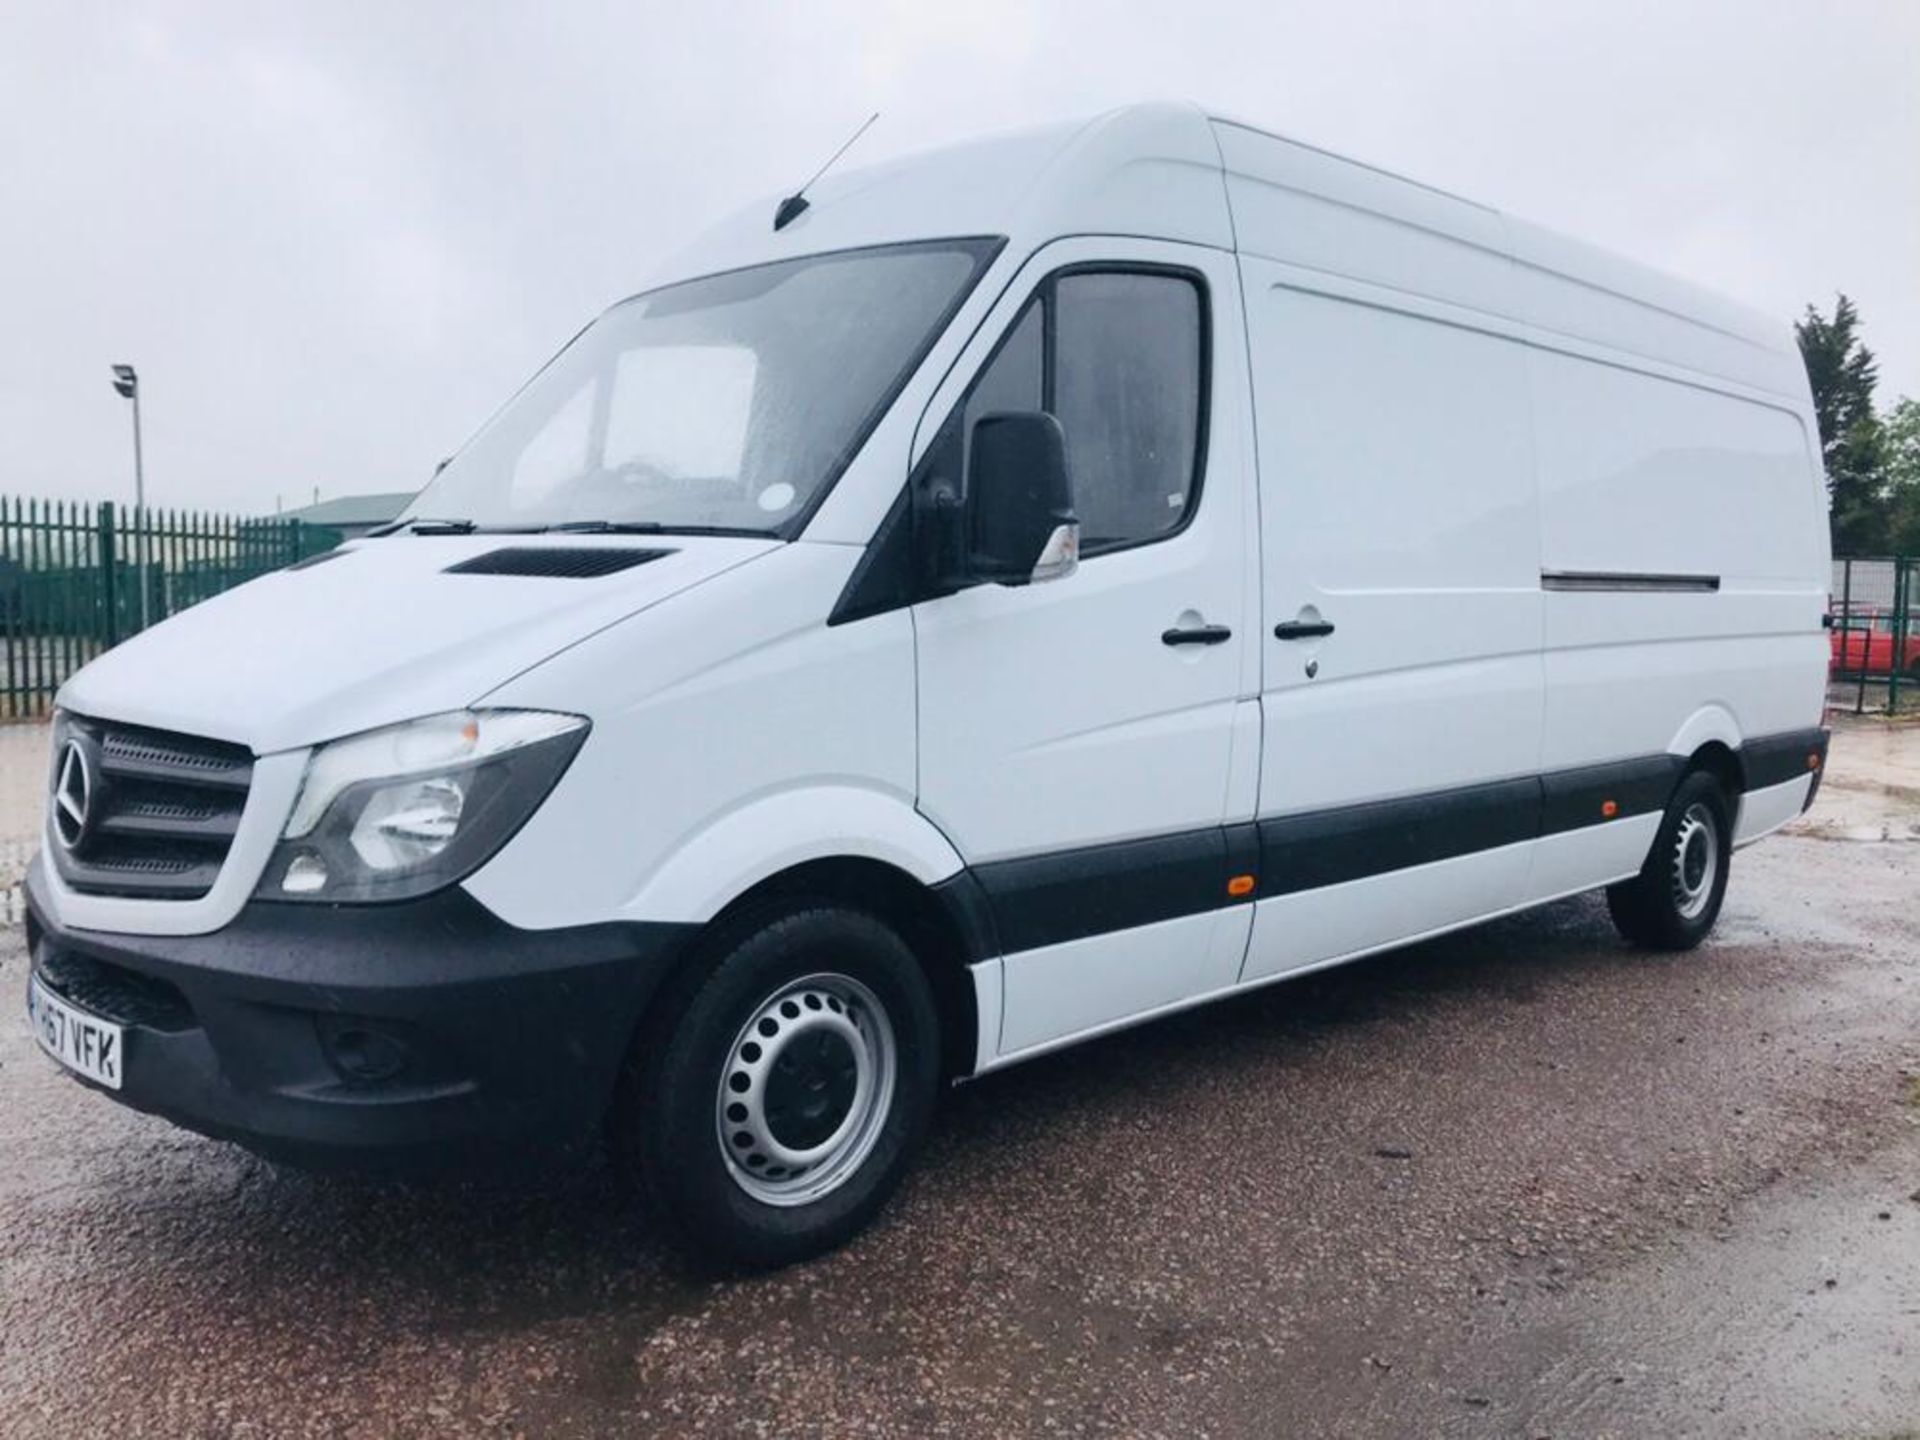 (ON SALE) MERCEDES SPRINTER 314CDI "140BHP" LWB (2018 MODEL) EURO 6 - LONDON COMPLIANT-DONT MISS OUT - Image 4 of 19